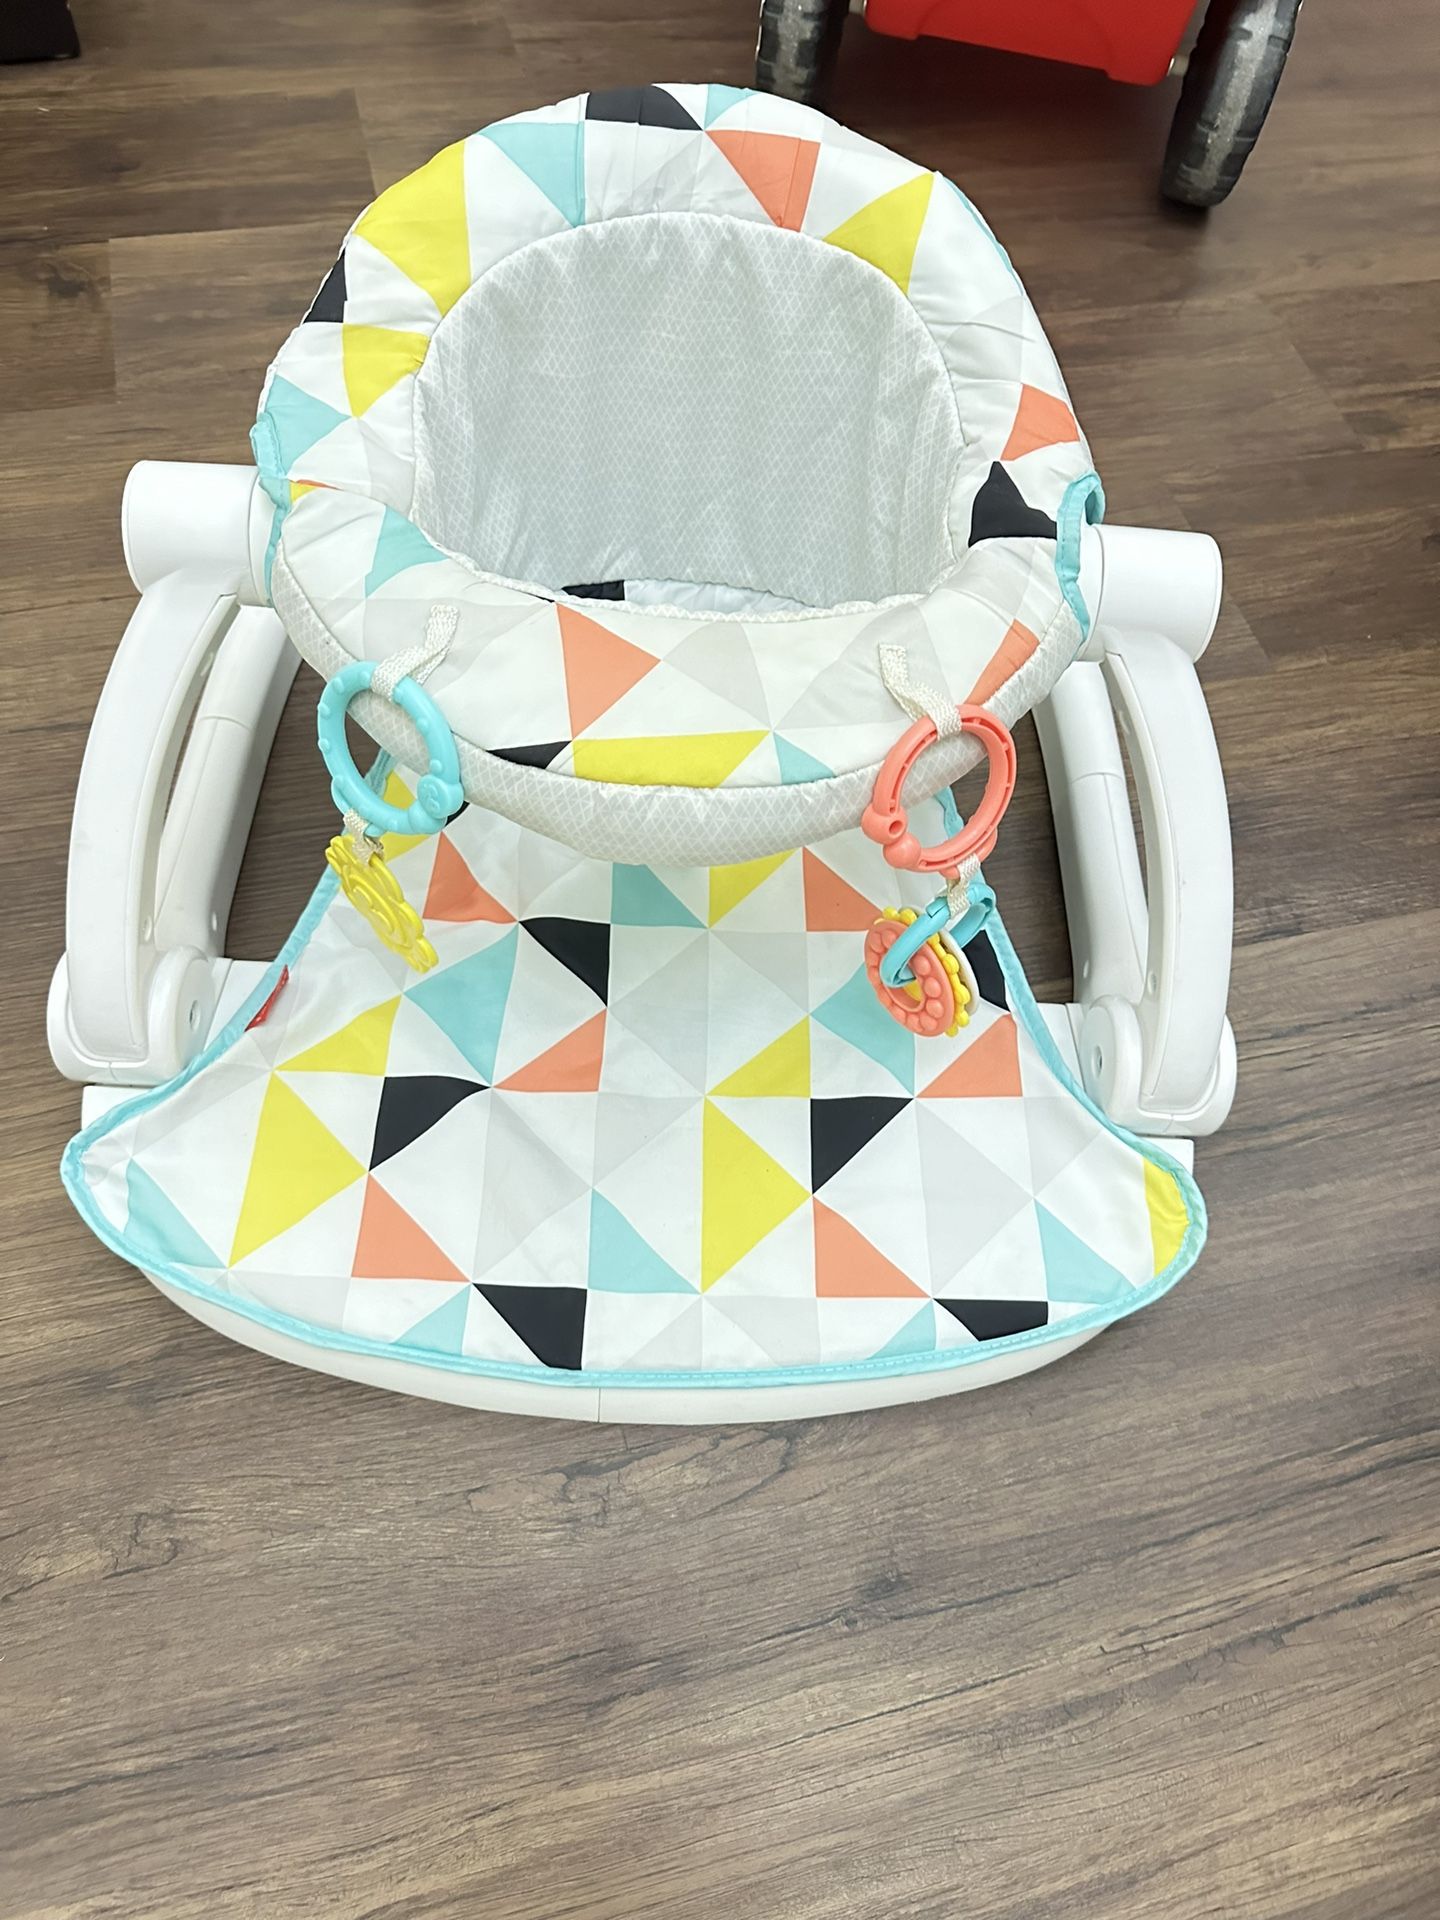 Fisher-Price Portable Baby Chair Sit-Me-Up Floor Seat With Developmental Toys & Machine Washable Seat Pad, Pacific Pebble